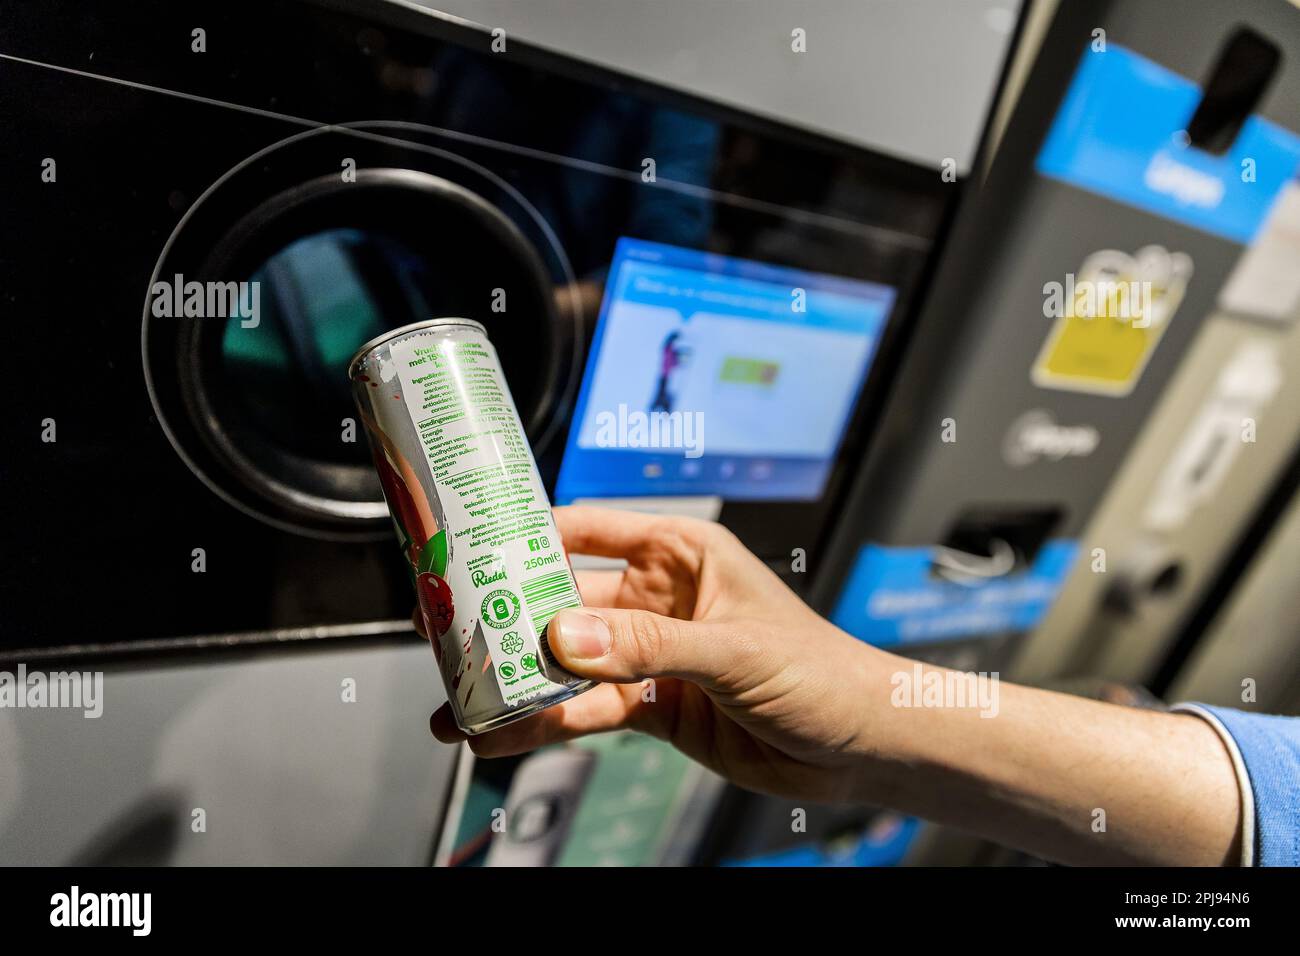 HAARLEM - A can with a deposit in a supermarket. In addition to small plastic bottles, there will also be a € 0.15 deposit on cans of drinks, such as soft drinks, beer and energy drinks. Cans with a deposit will soon be recognizable by the deposit logo and can be handed in at more than 27,000 collection points, such as supermarkets, petrol stations along the highway and sports clubs. ANP REMKO DE WAAL netherlands out - belgium out Credit: ANP/Alamy Live News Stock Photo